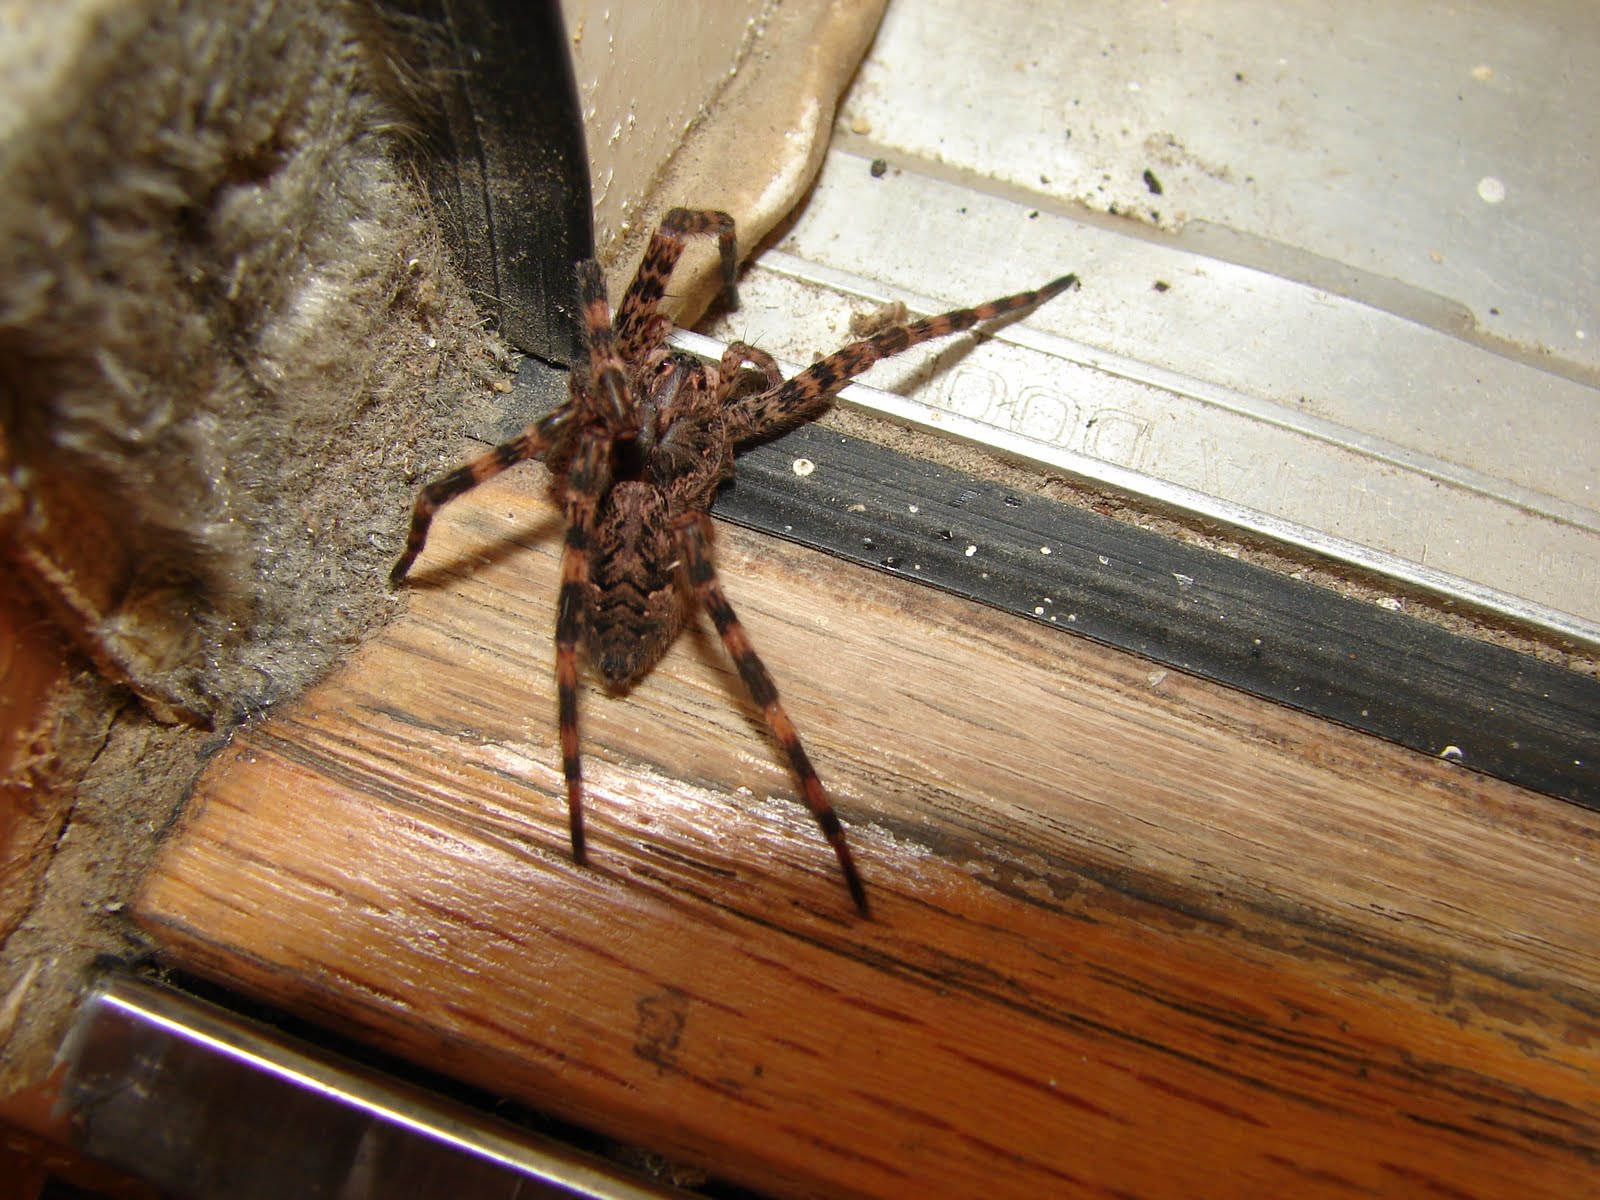 Our Life in Illinois: Spiders